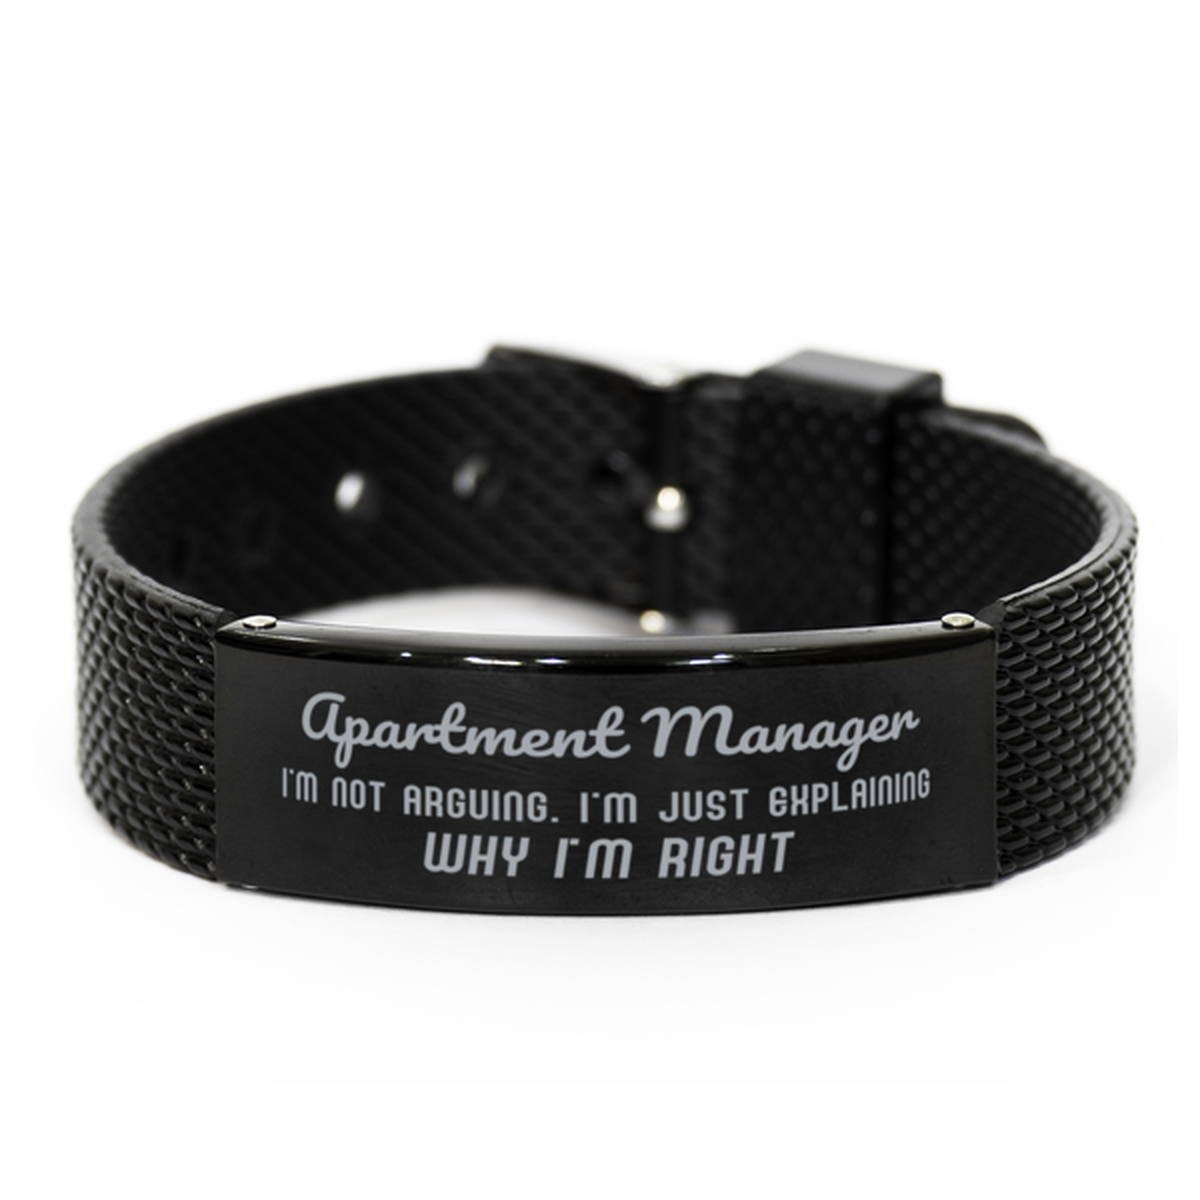 Apartment Manager I'm not Arguing. I'm Just Explaining Why I'm RIGHT Black Shark Mesh Bracelet, Funny Saying Quote Apartment Manager Gifts For Apartment Manager Graduation Birthday Christmas Gifts for Men Women Coworker